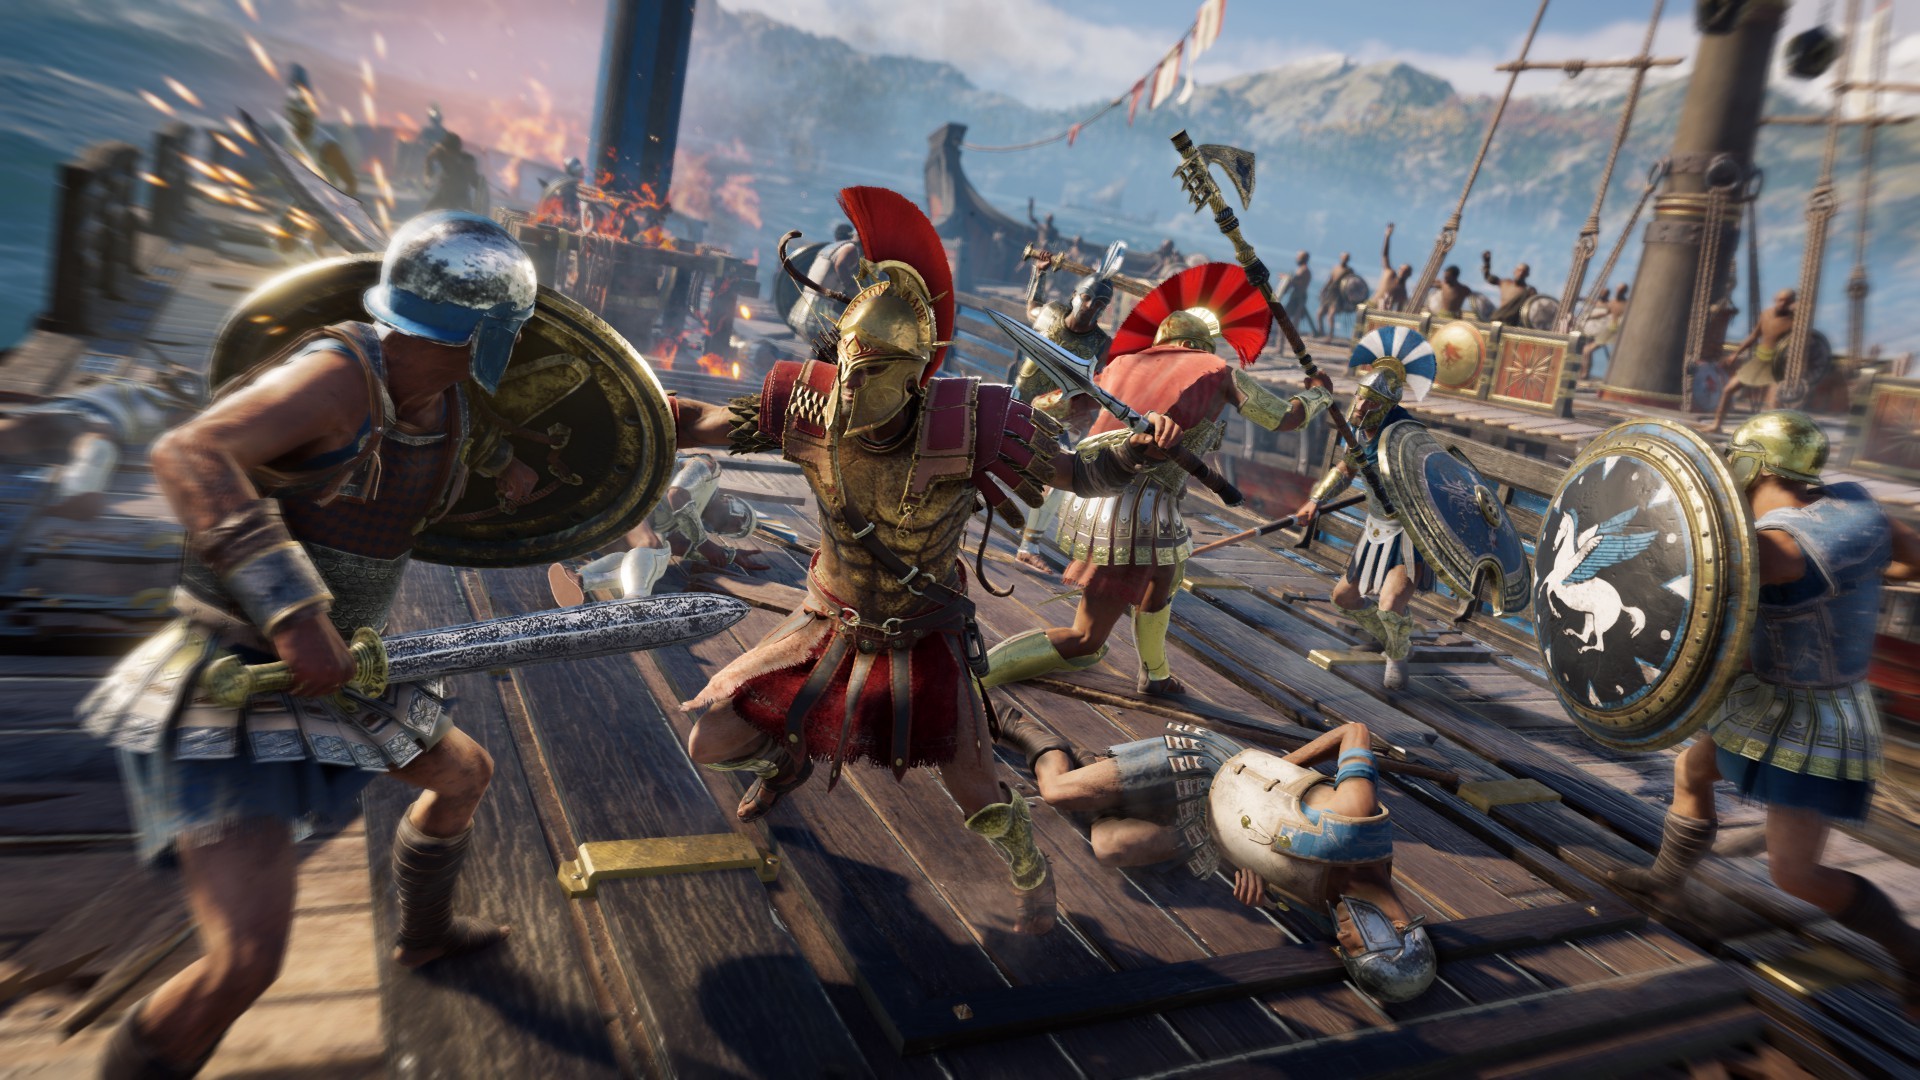 Google’s Project Stream wrapped up a beta trial last month that allowed testers to stream the game Assassin’s Creed: Odyssey online. Image: Ubisoft